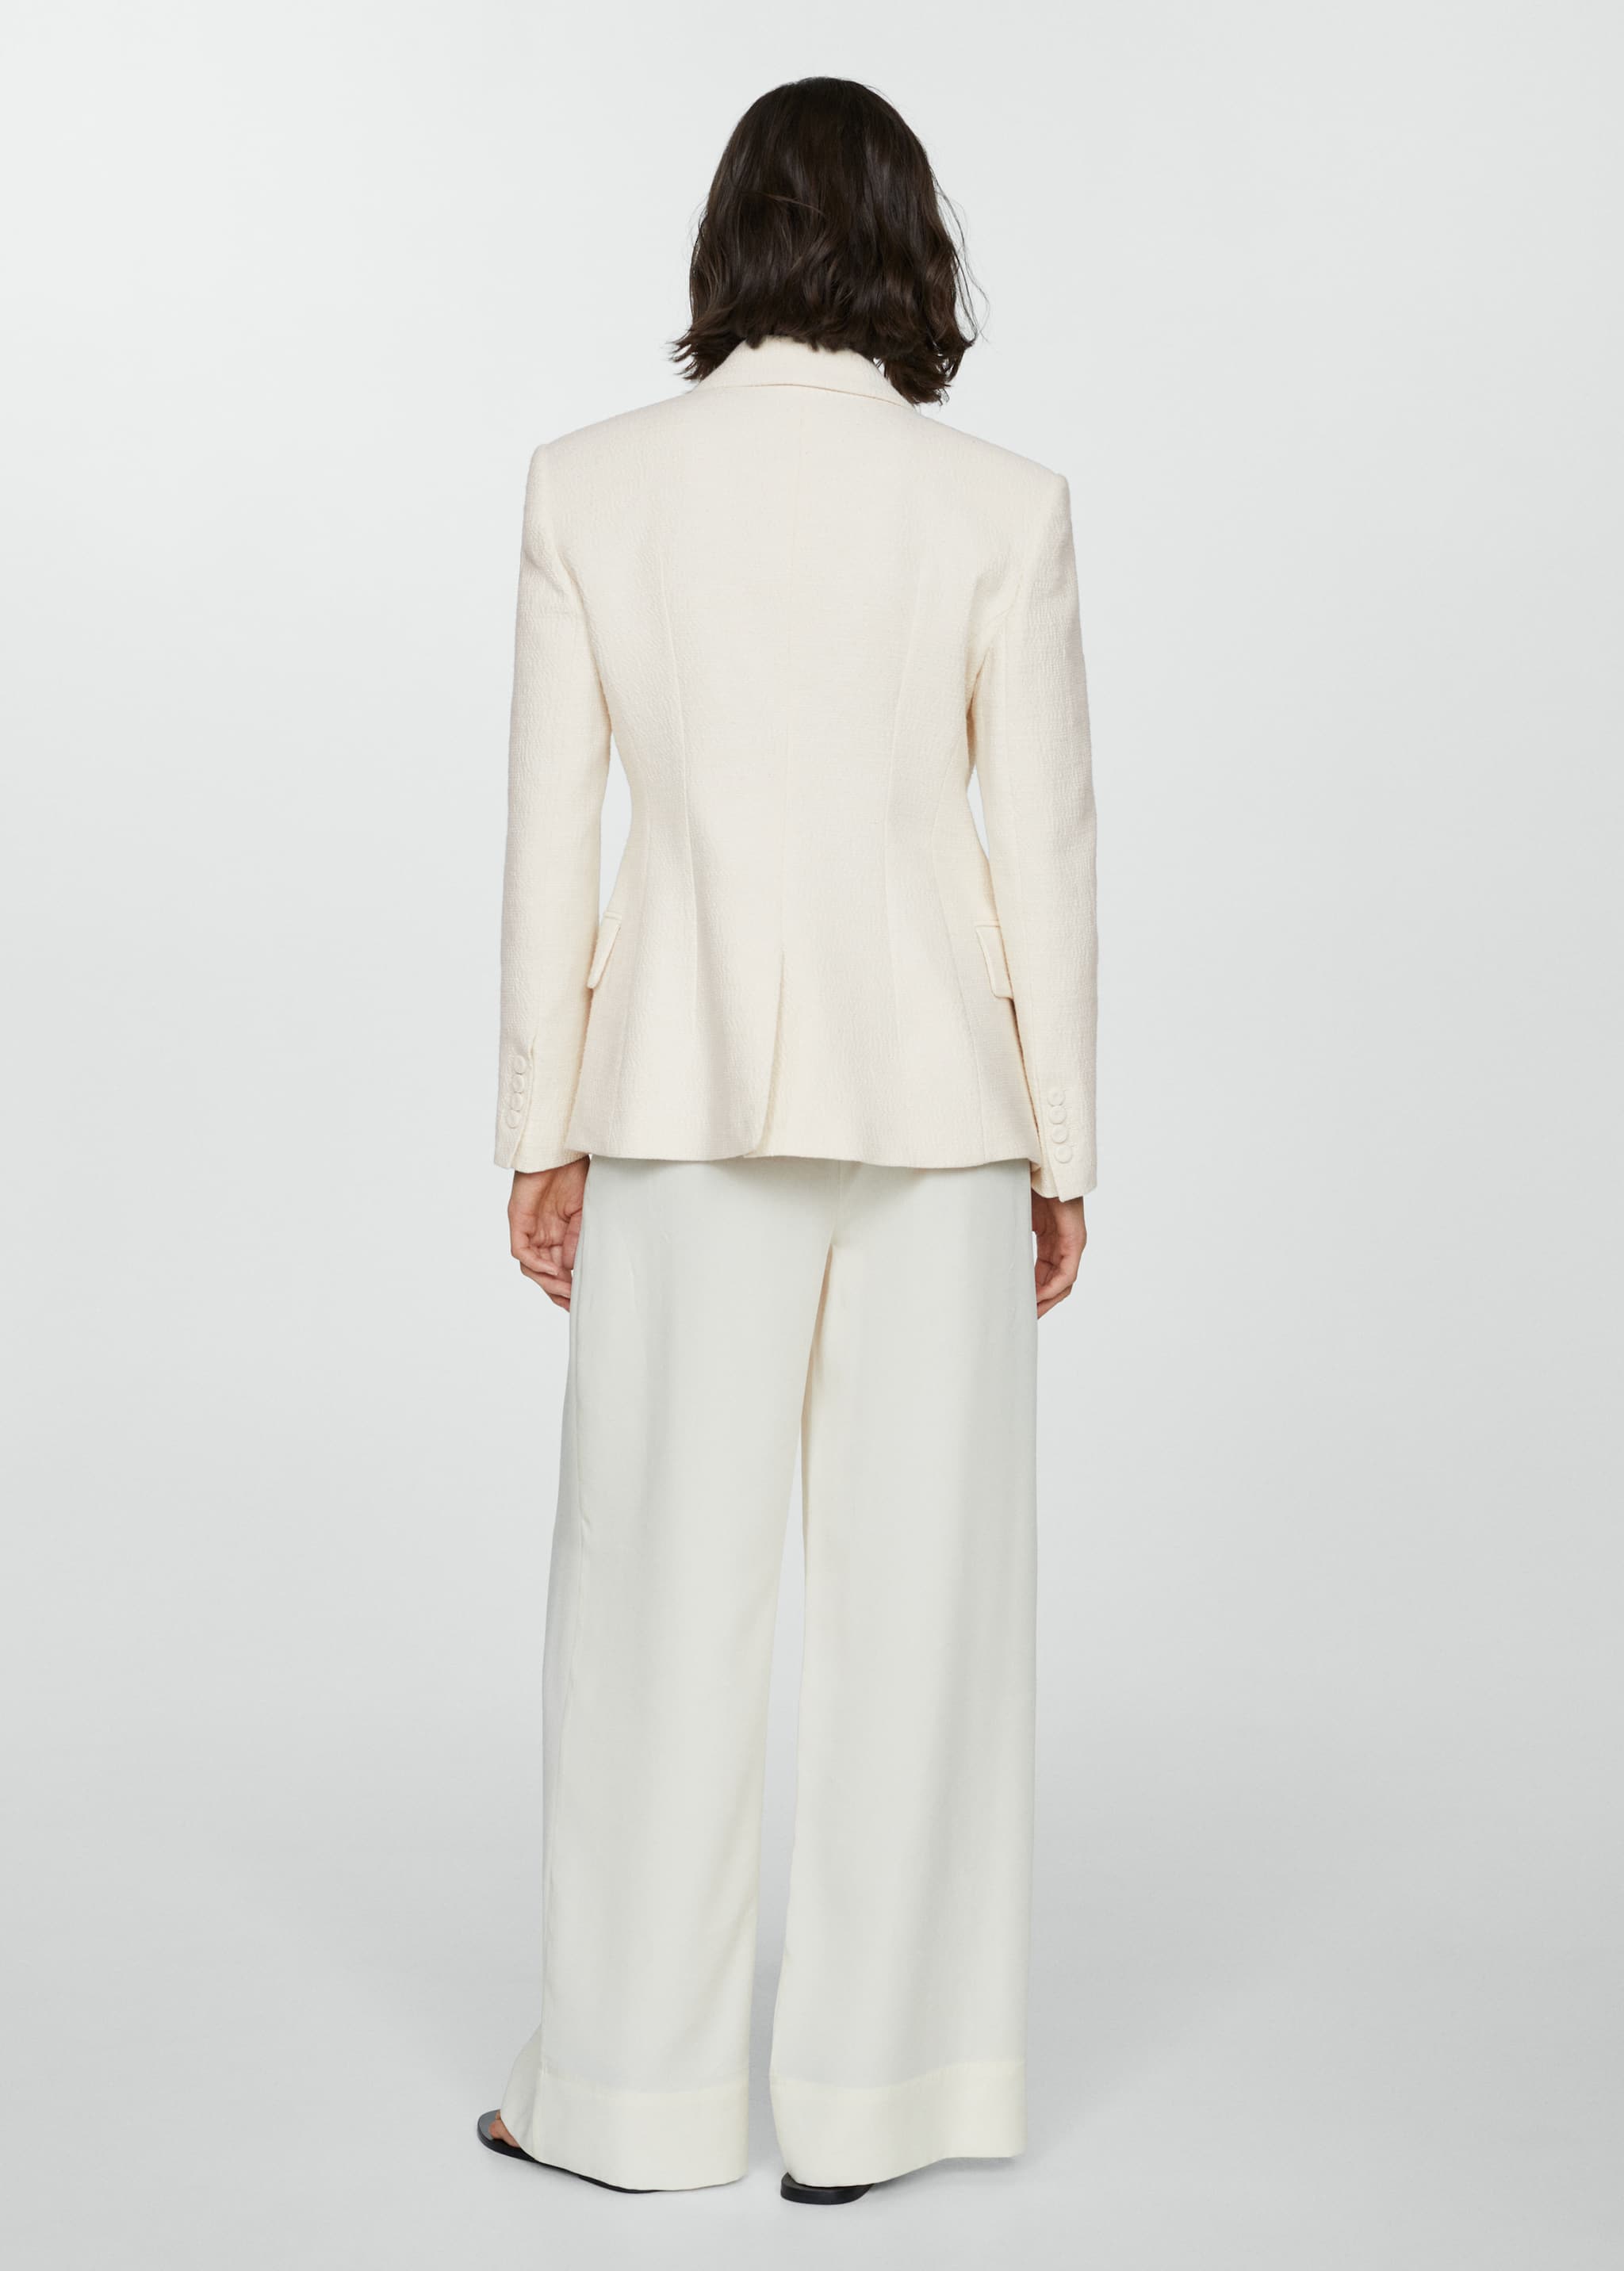 Textured blazer with darted detail - Reverse of the article